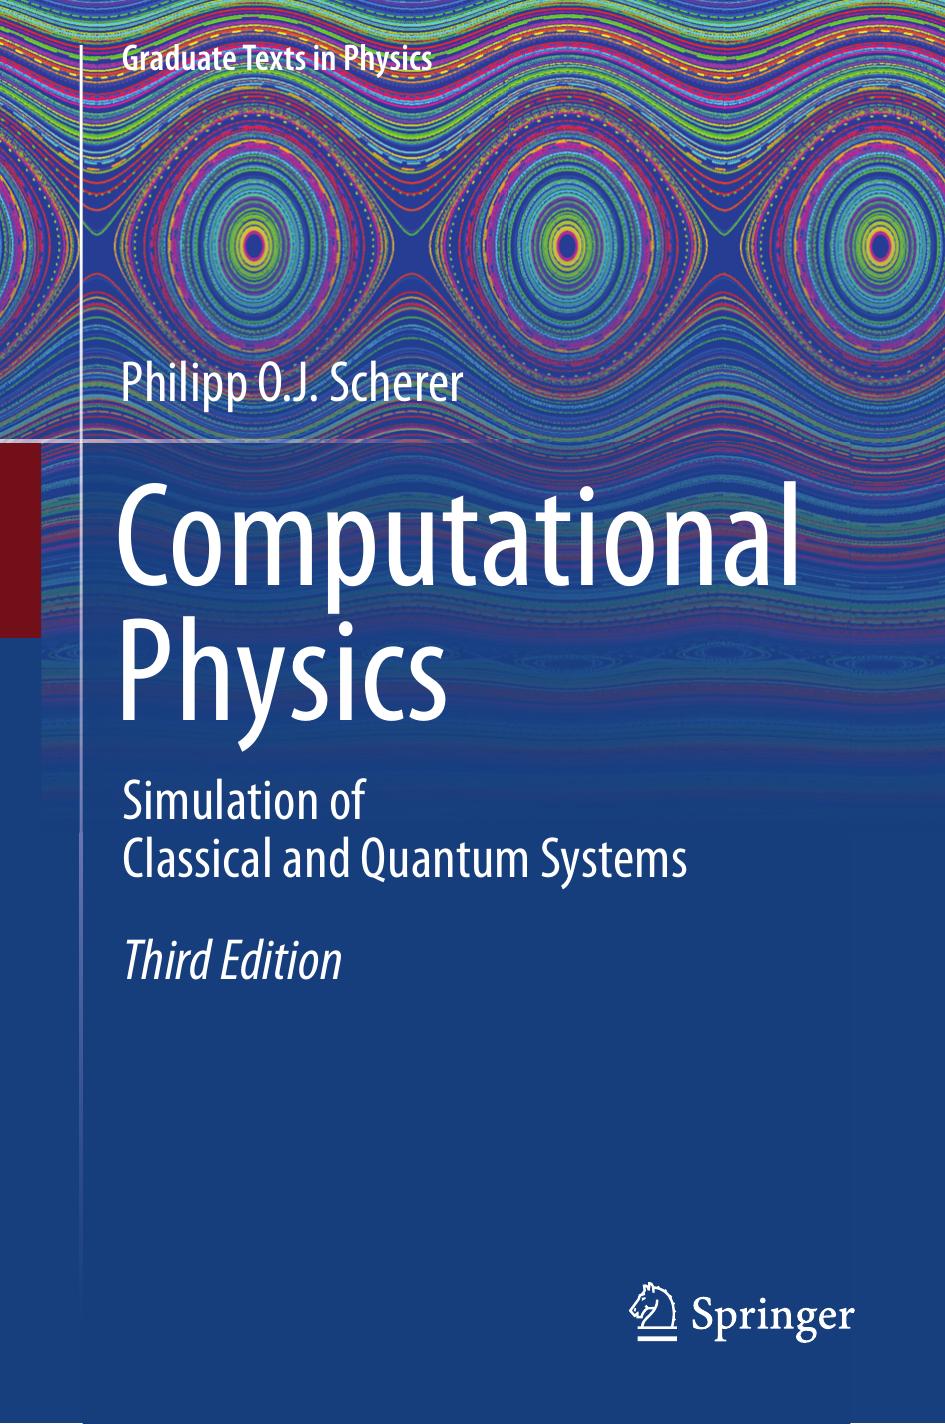 Computational physics simulation of classical and quantum systems 2017